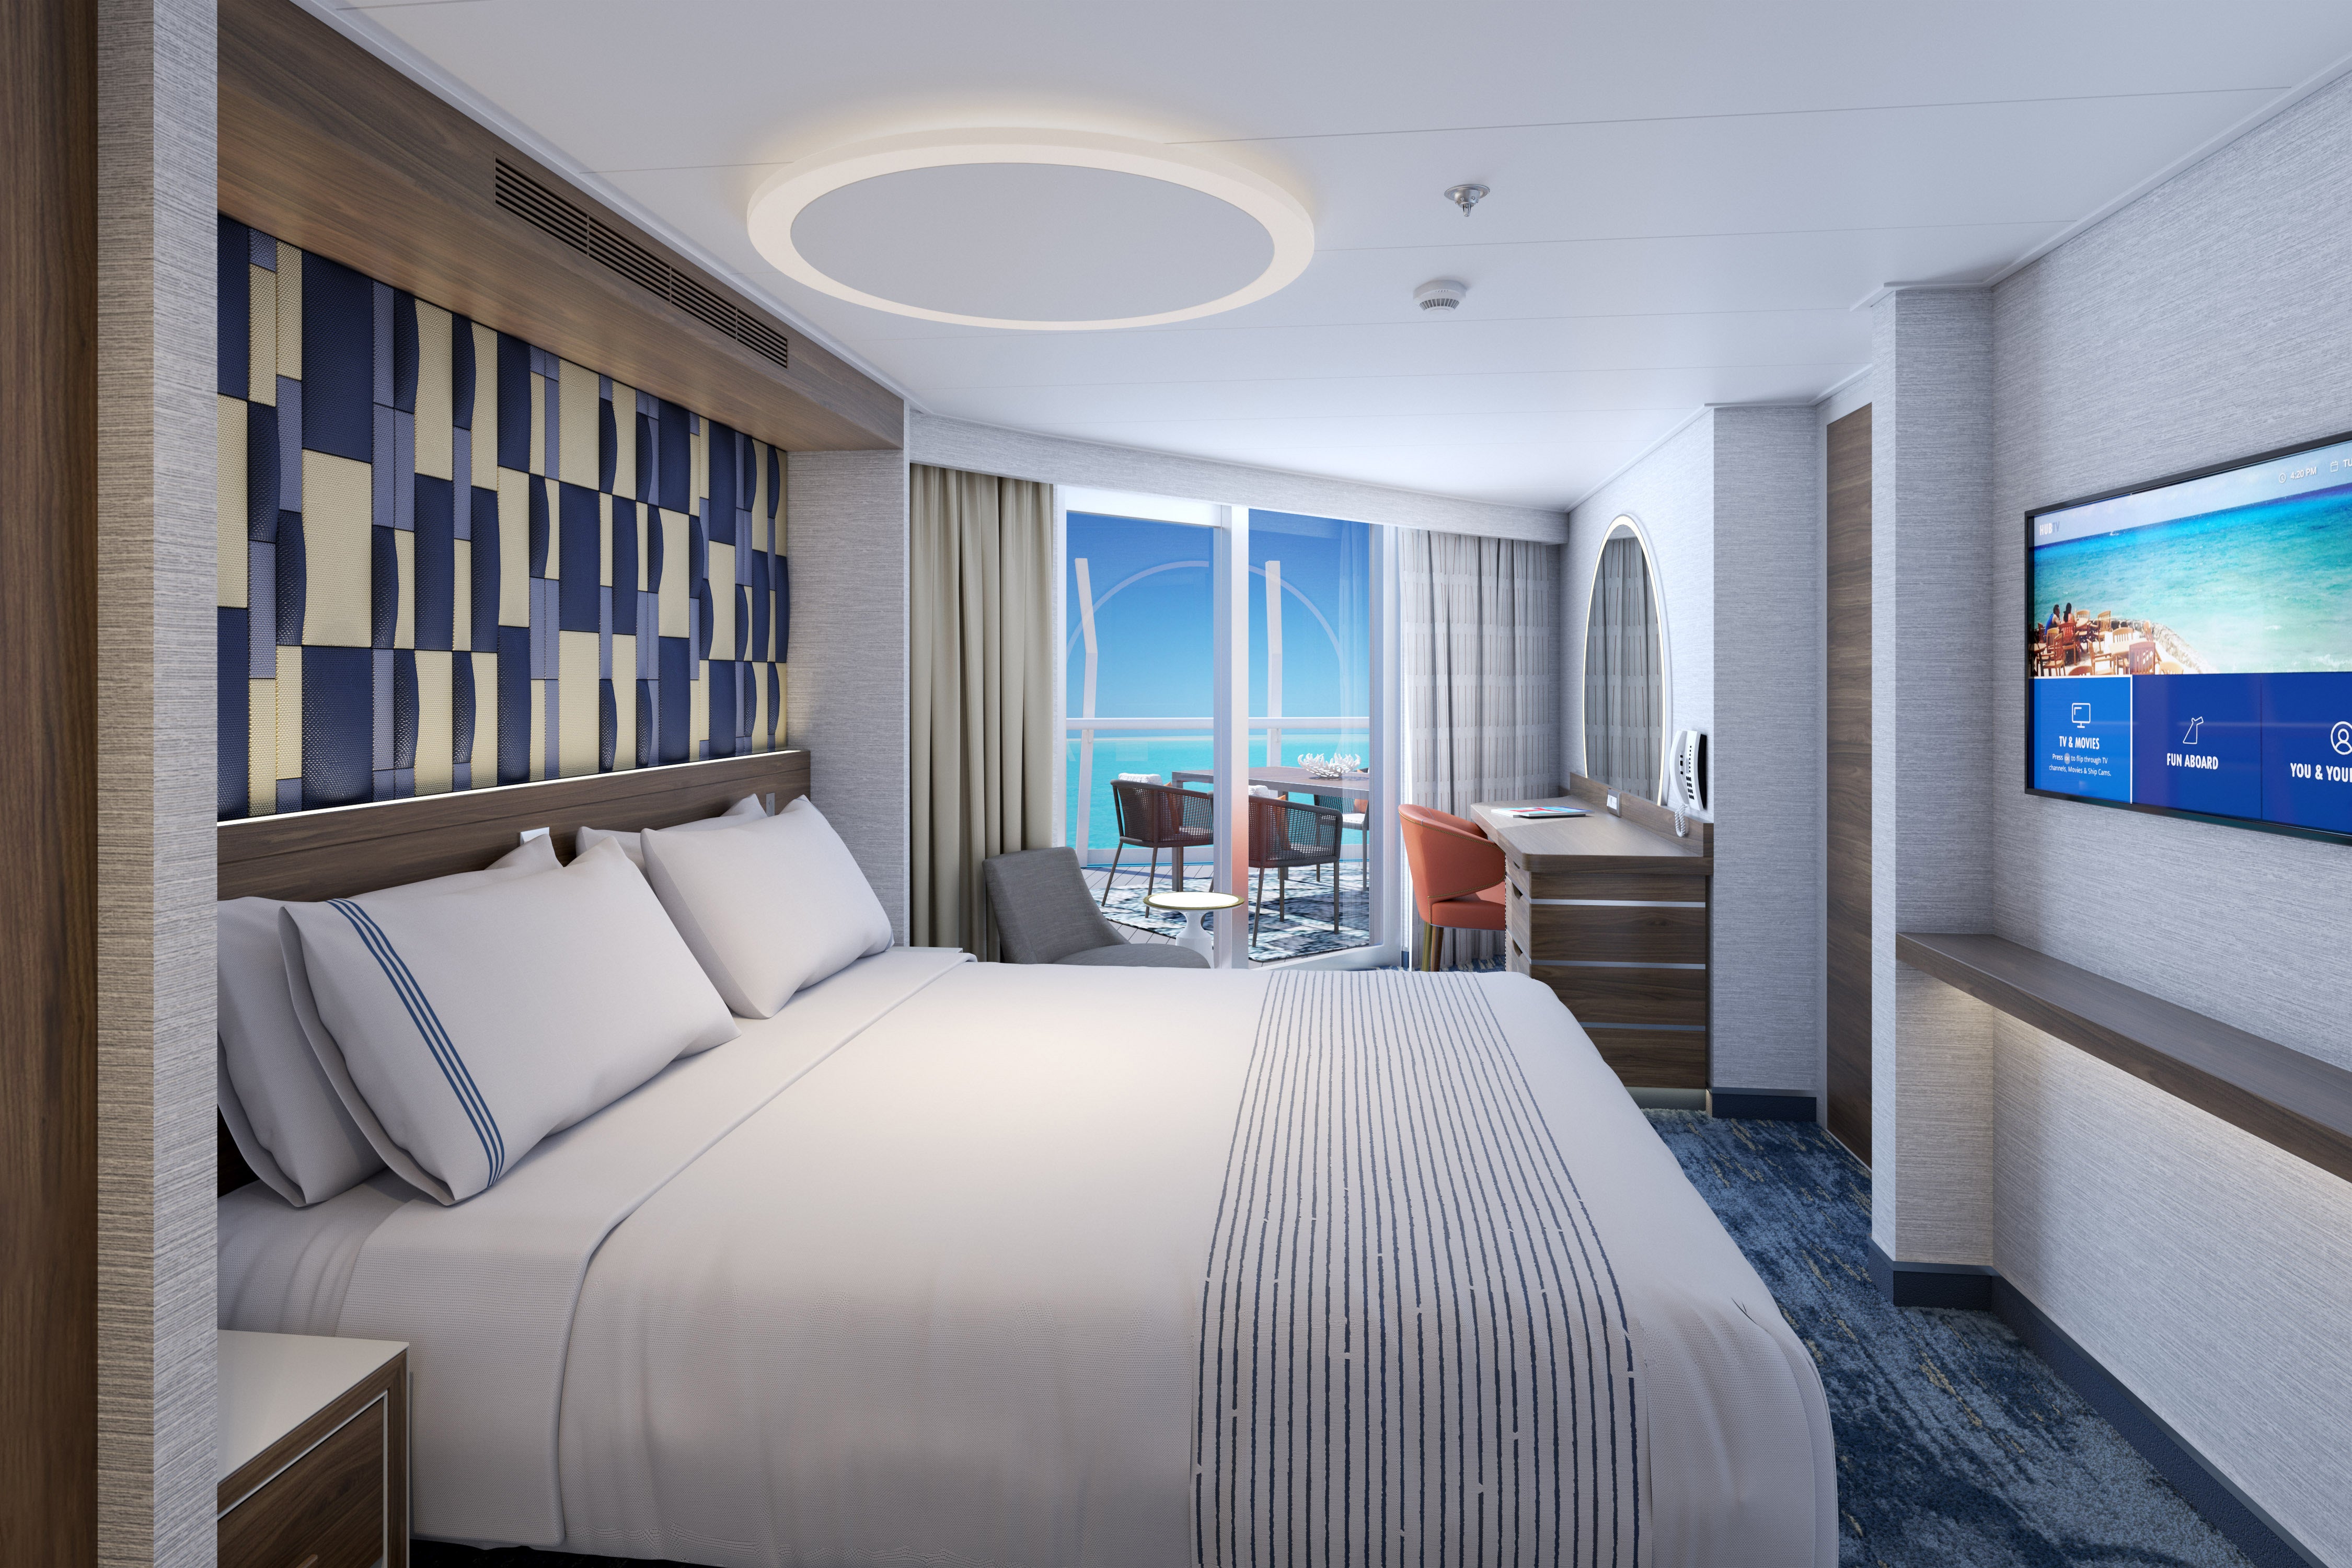 An artist's drawing of an Excel Presidential Suite planned for Carnival's next ship, Mardi Gras. (Image courtesy of Carnival Cruise Line)